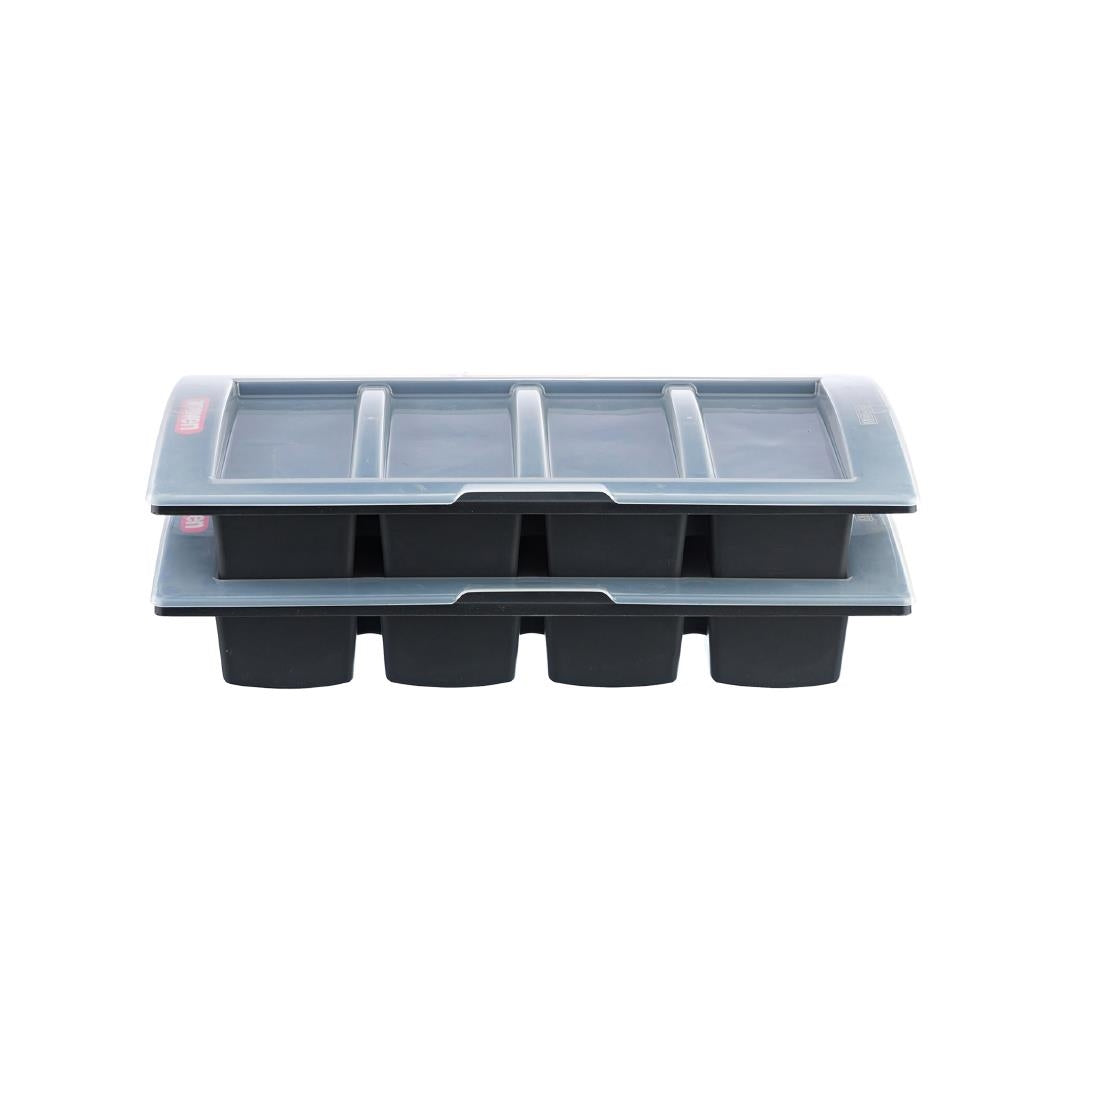 Araven Dark Grey Cutlery Tray with Lid CH934 JD Catering Equipment Solutions Ltd